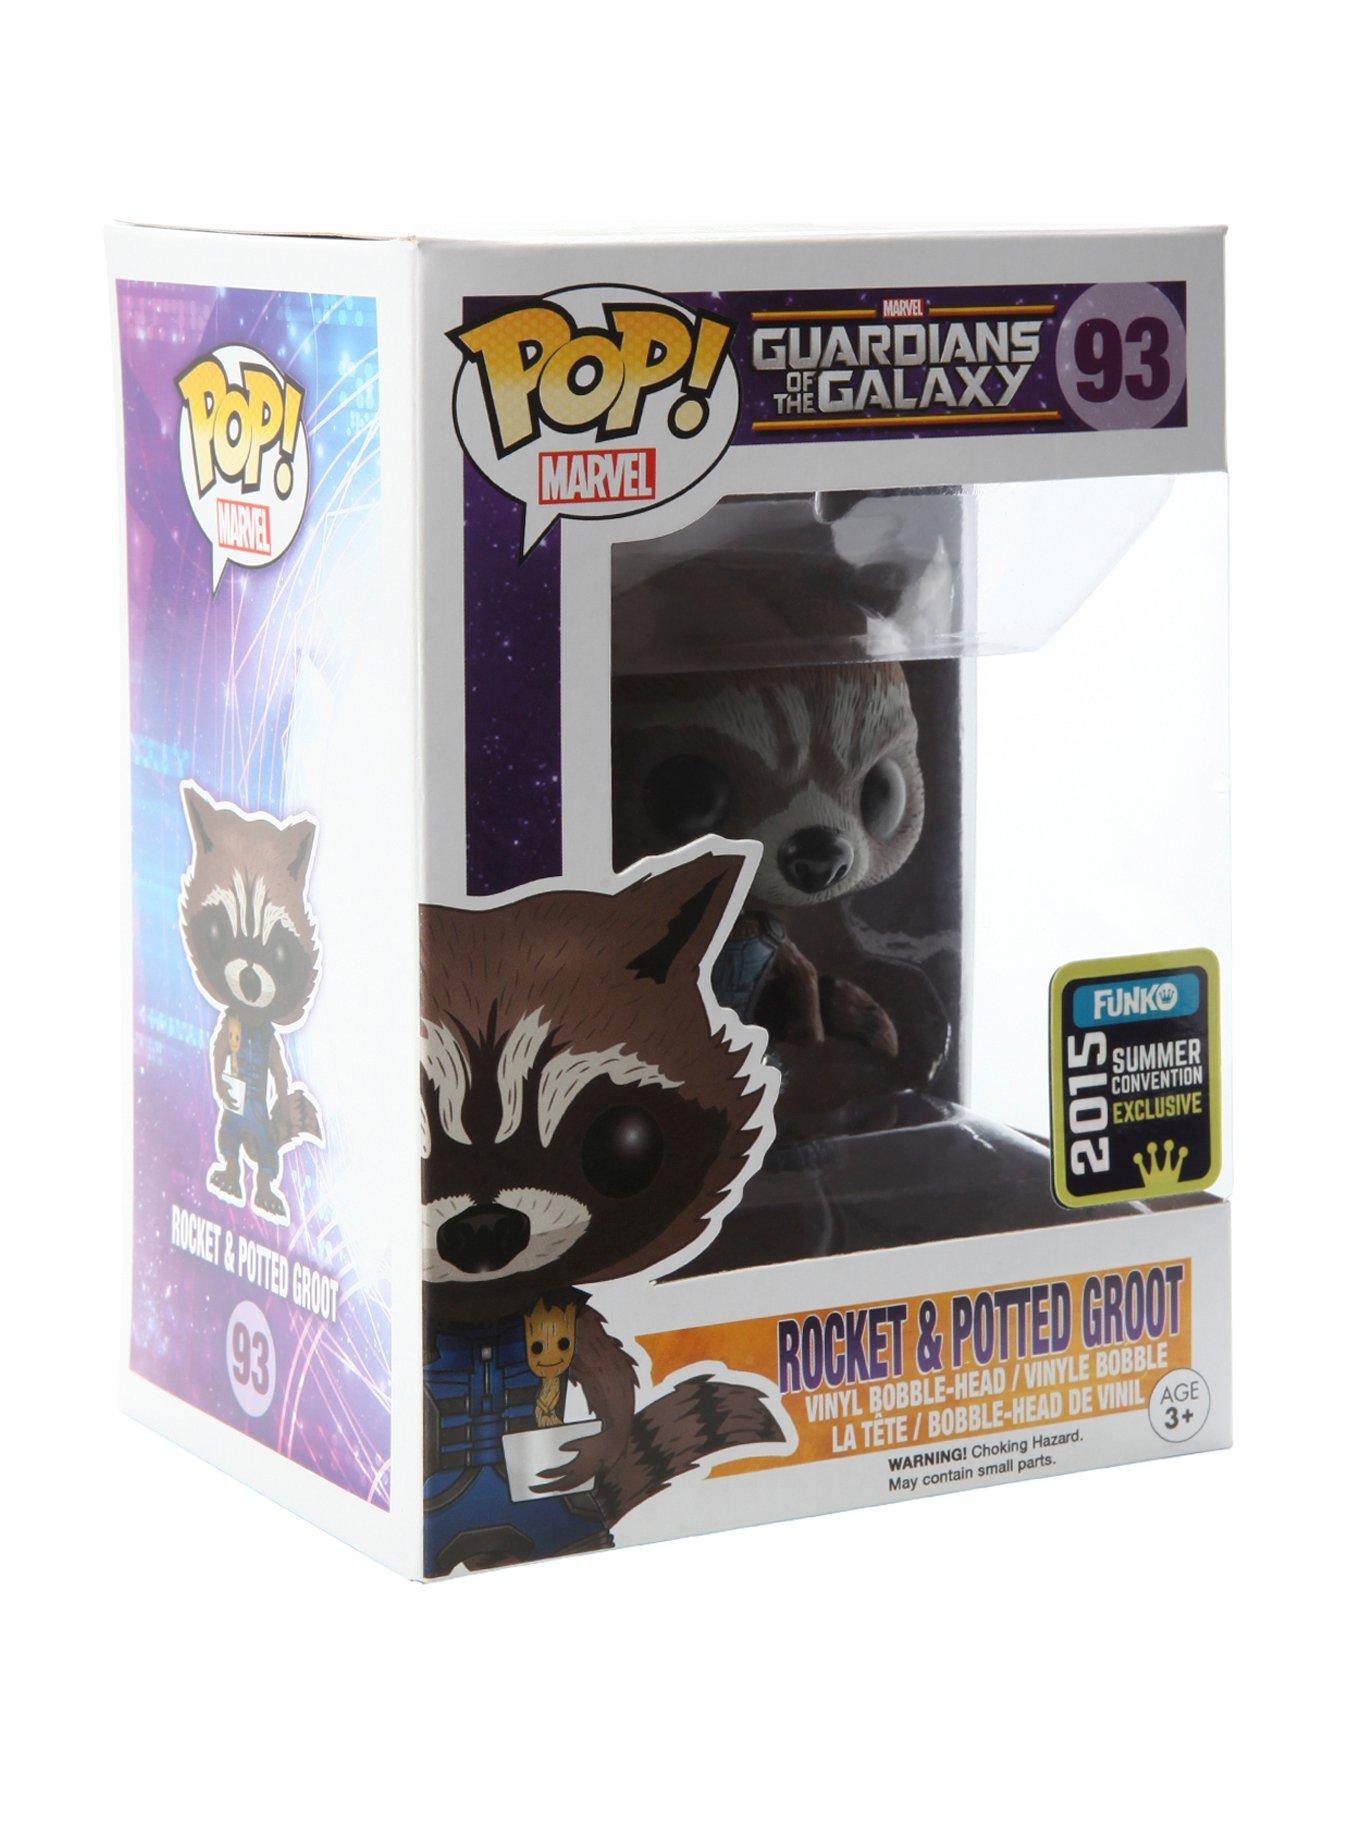 Funko Marvel Guardians Of The Galaxy Pop! Rocket & Potted Groot Vinyl Bobble-Head 2015 Summer Convention Exclusive, , hi-res